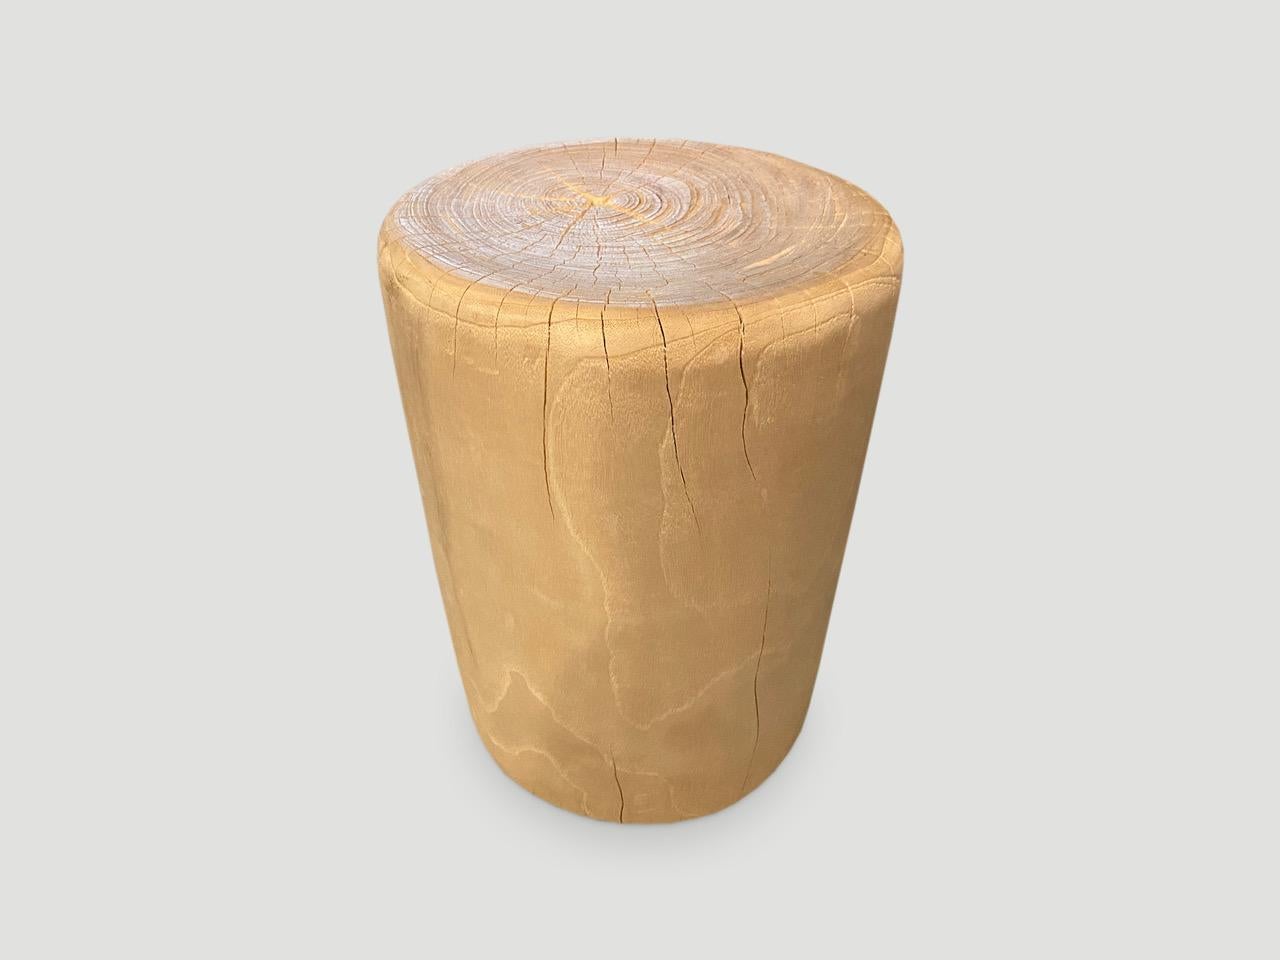 Reclaimed teak wood side table or stool. Hand carved with soft rounded sides, into a drum shape whilst respecting the natural organic wood. Bleached to a bone finish. There is a slight graduation from the bottom to the top. Also available